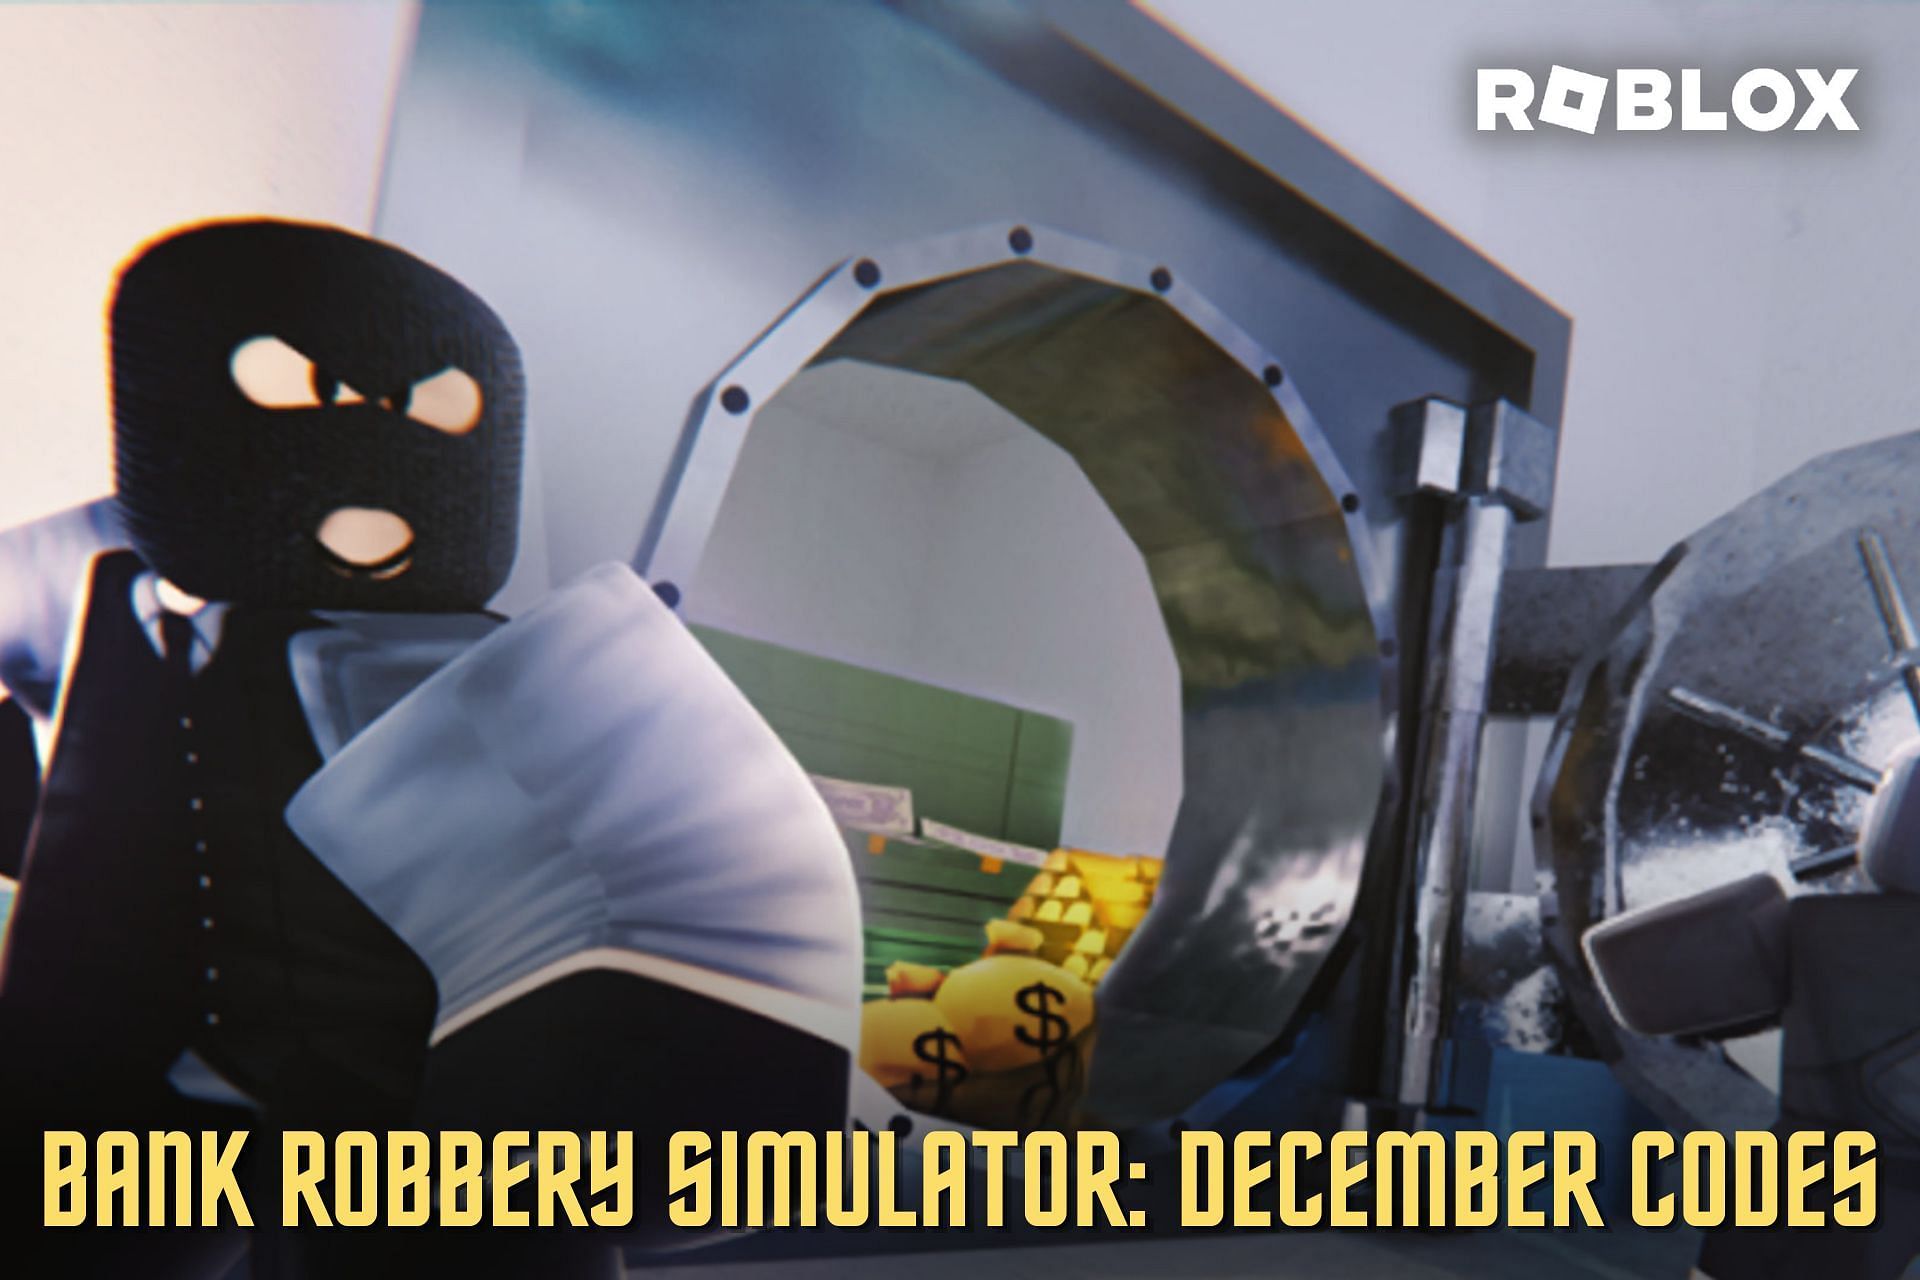 Roblox Bank Robbery Simulator codes for December 2022 Free coins and